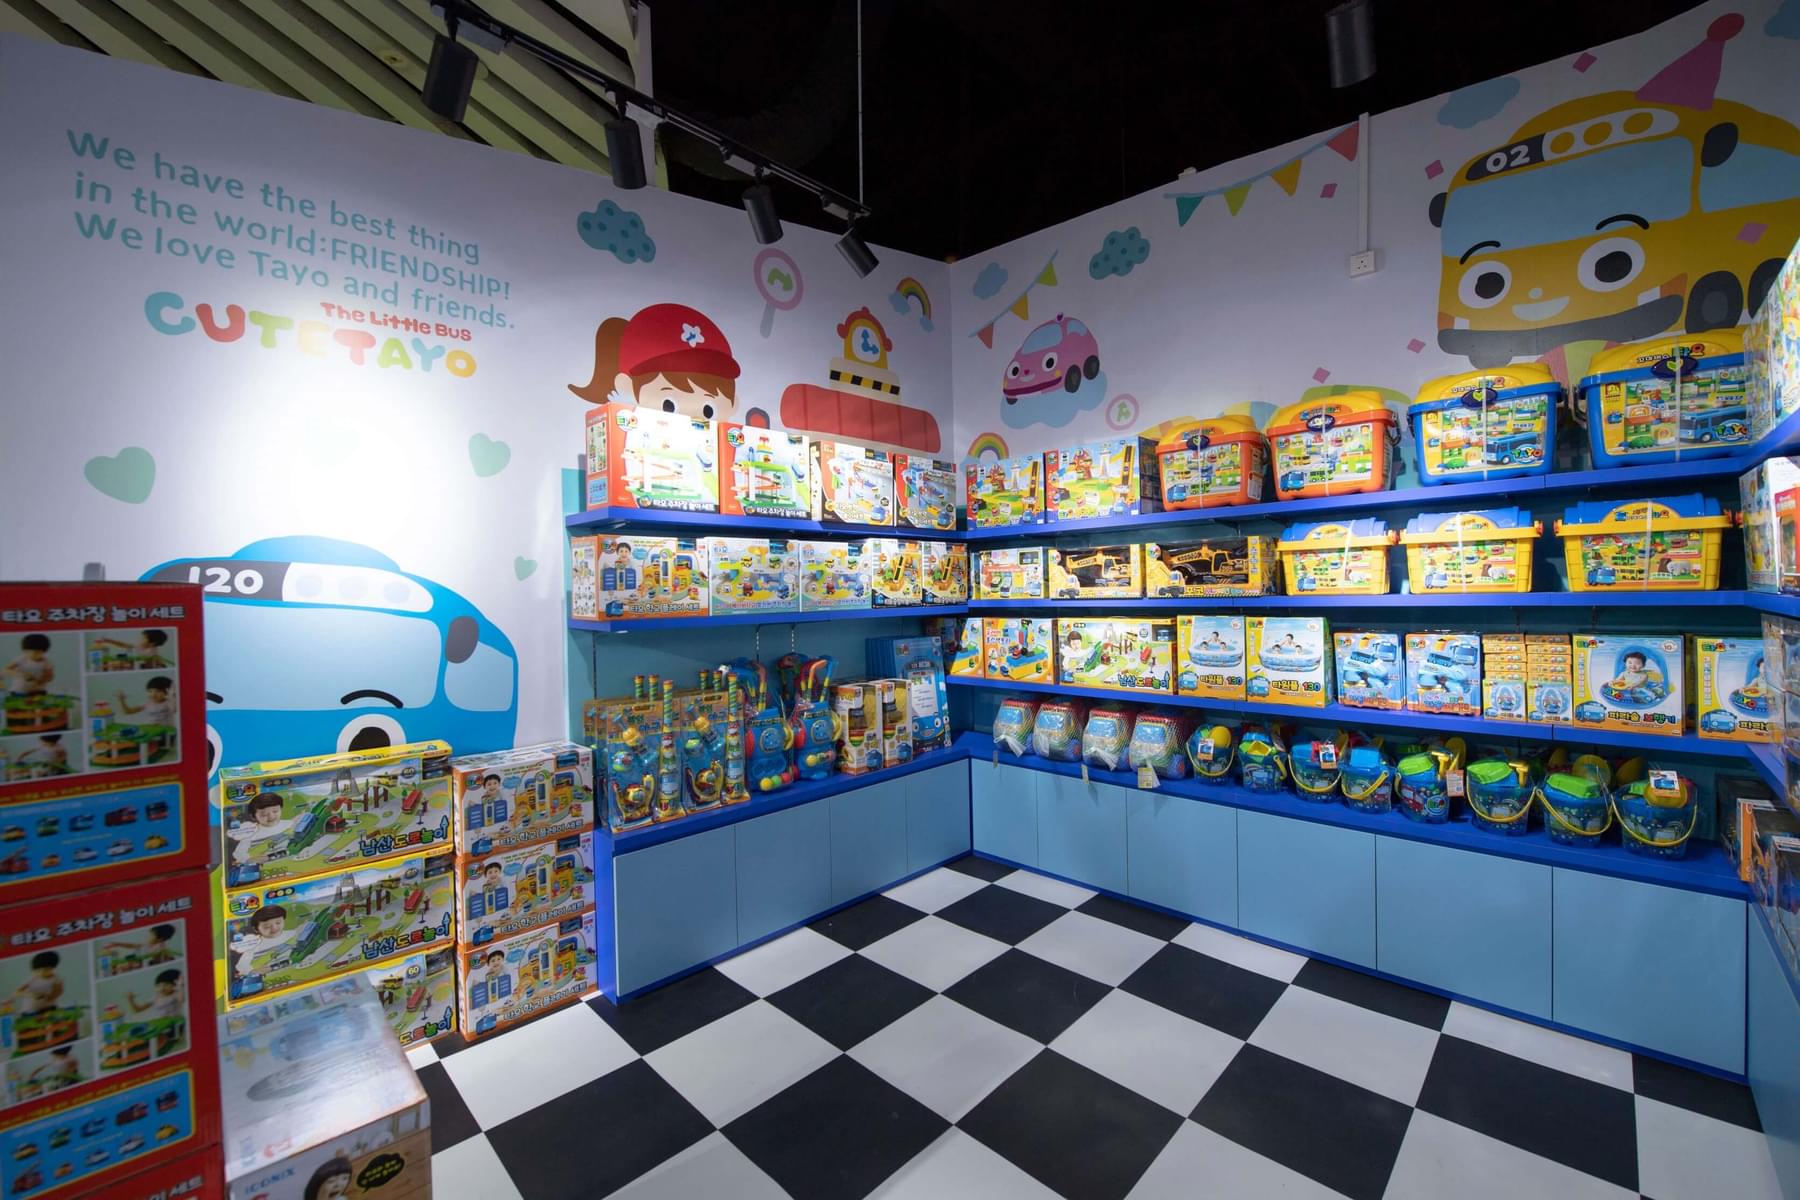 Tayo’s Toy Store